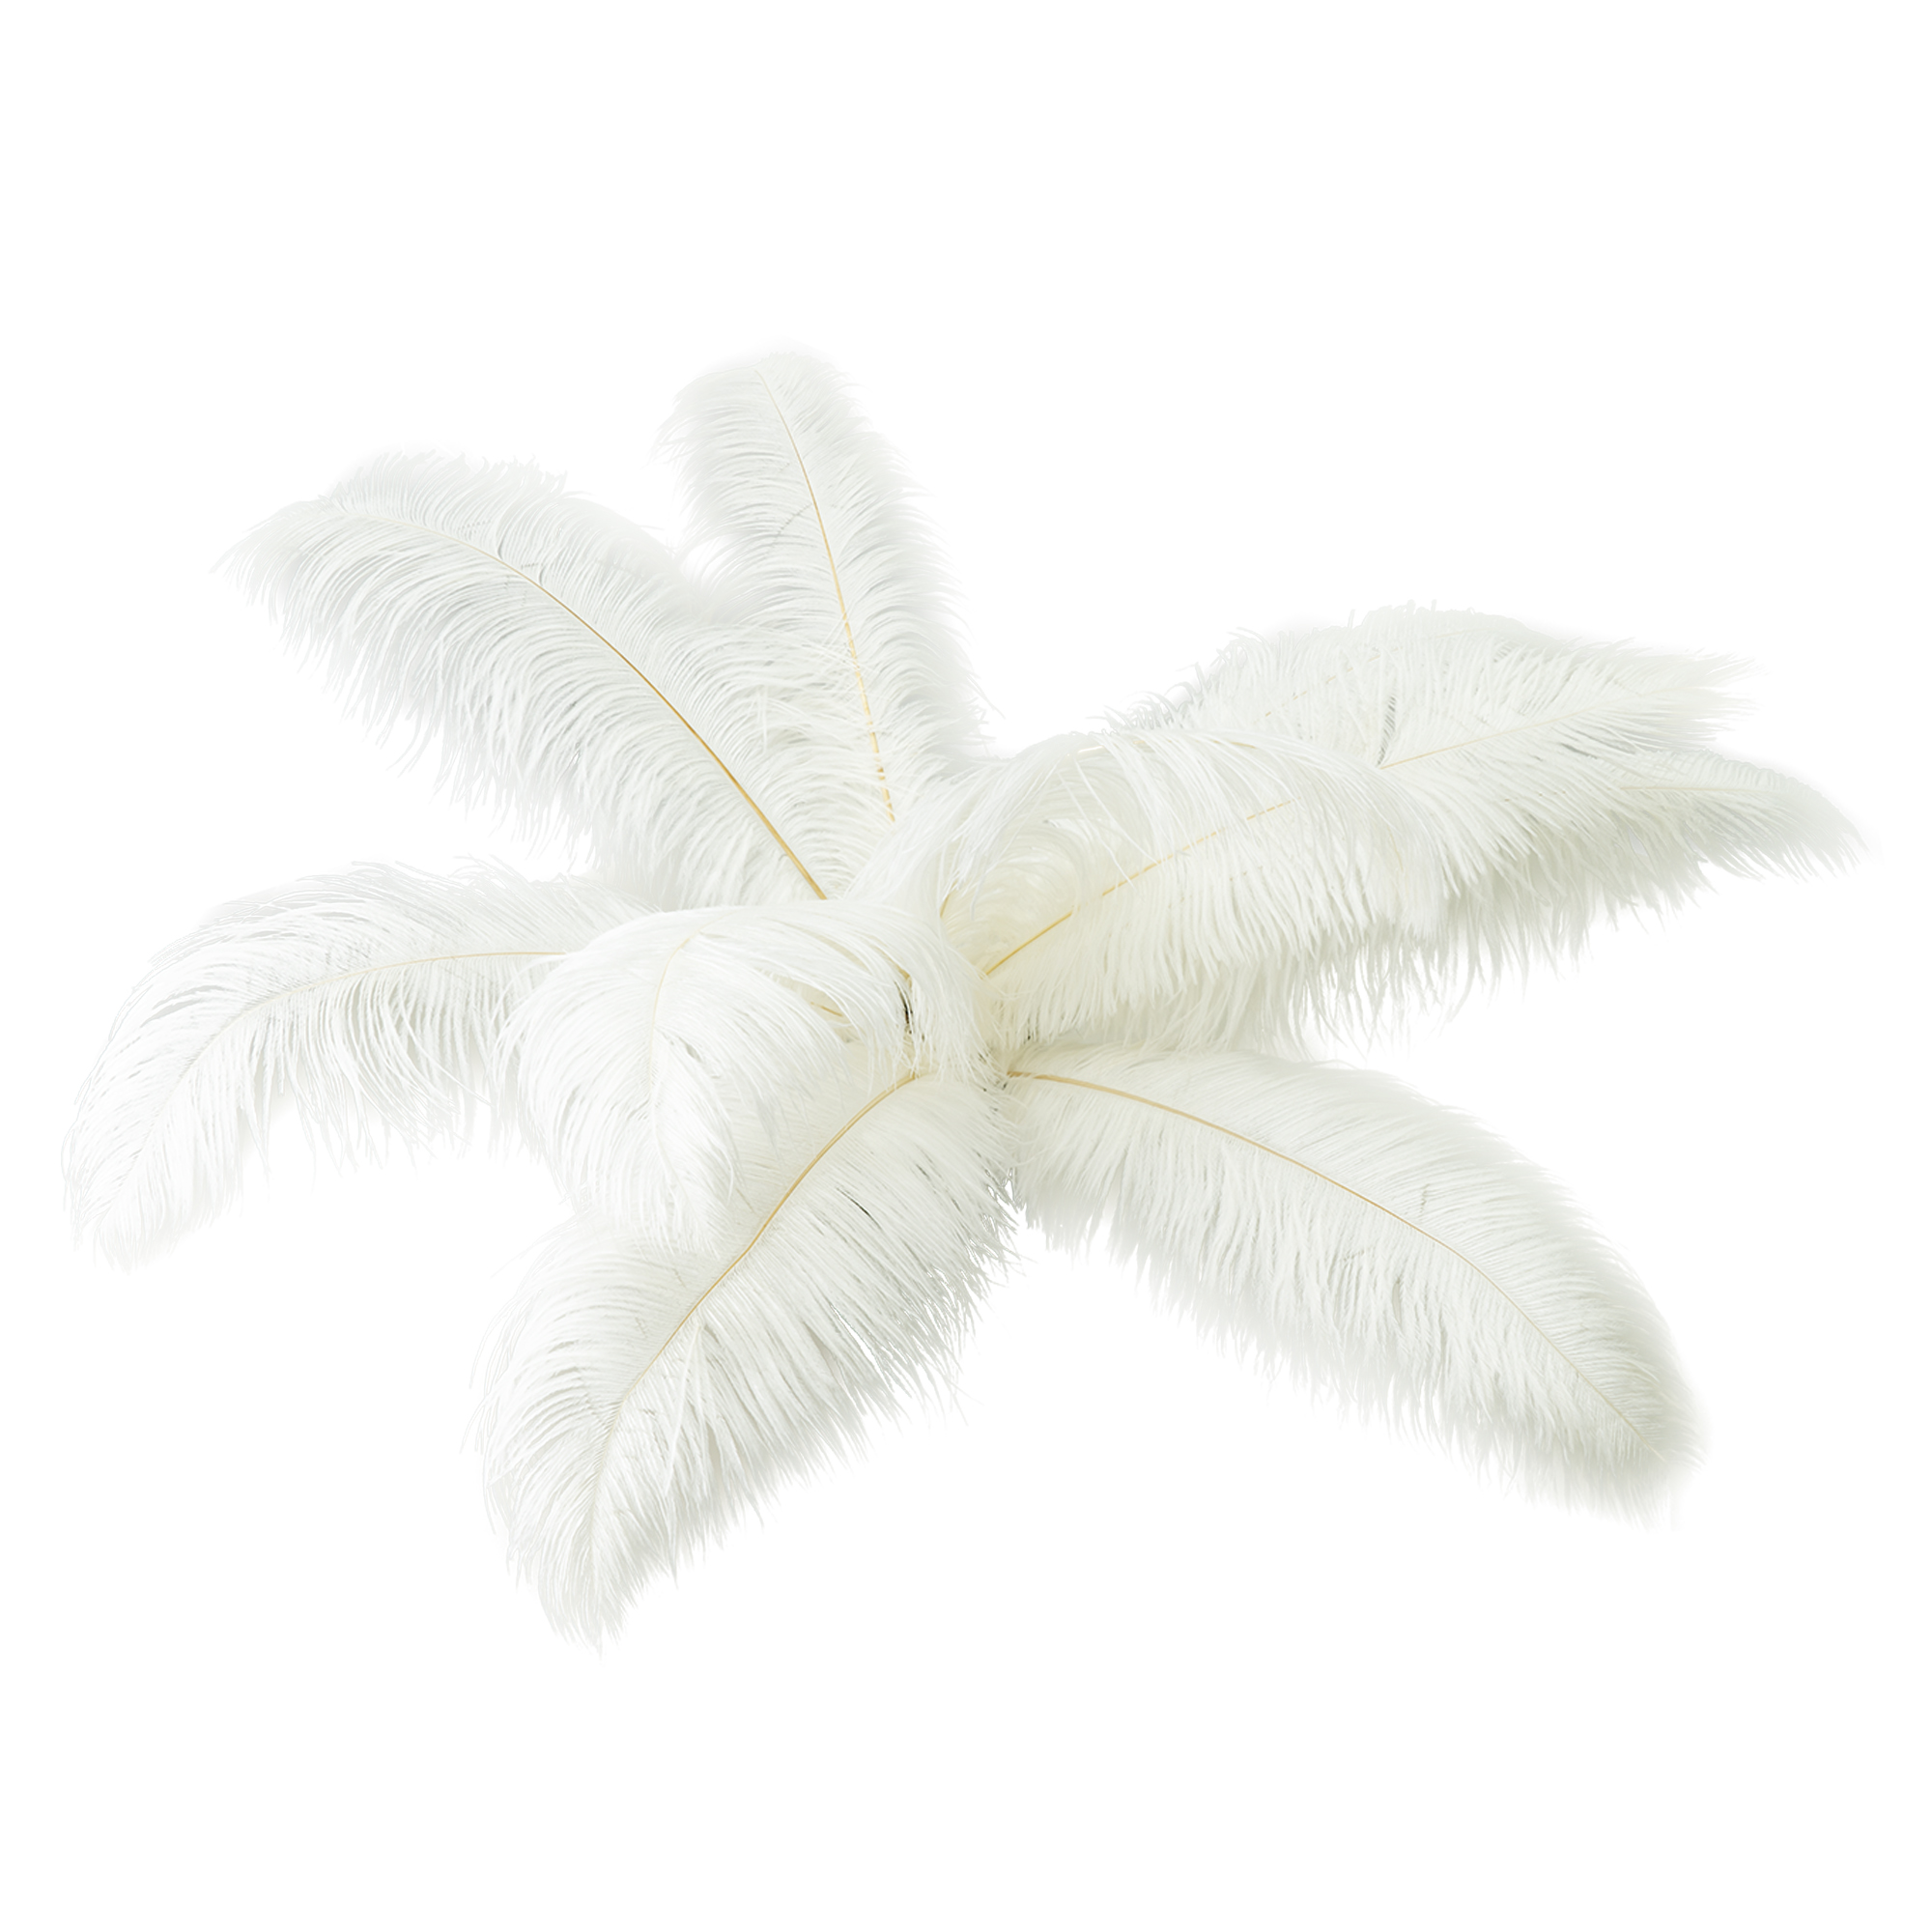 Ostrich Feather 12pc/bag 13"-15" - White